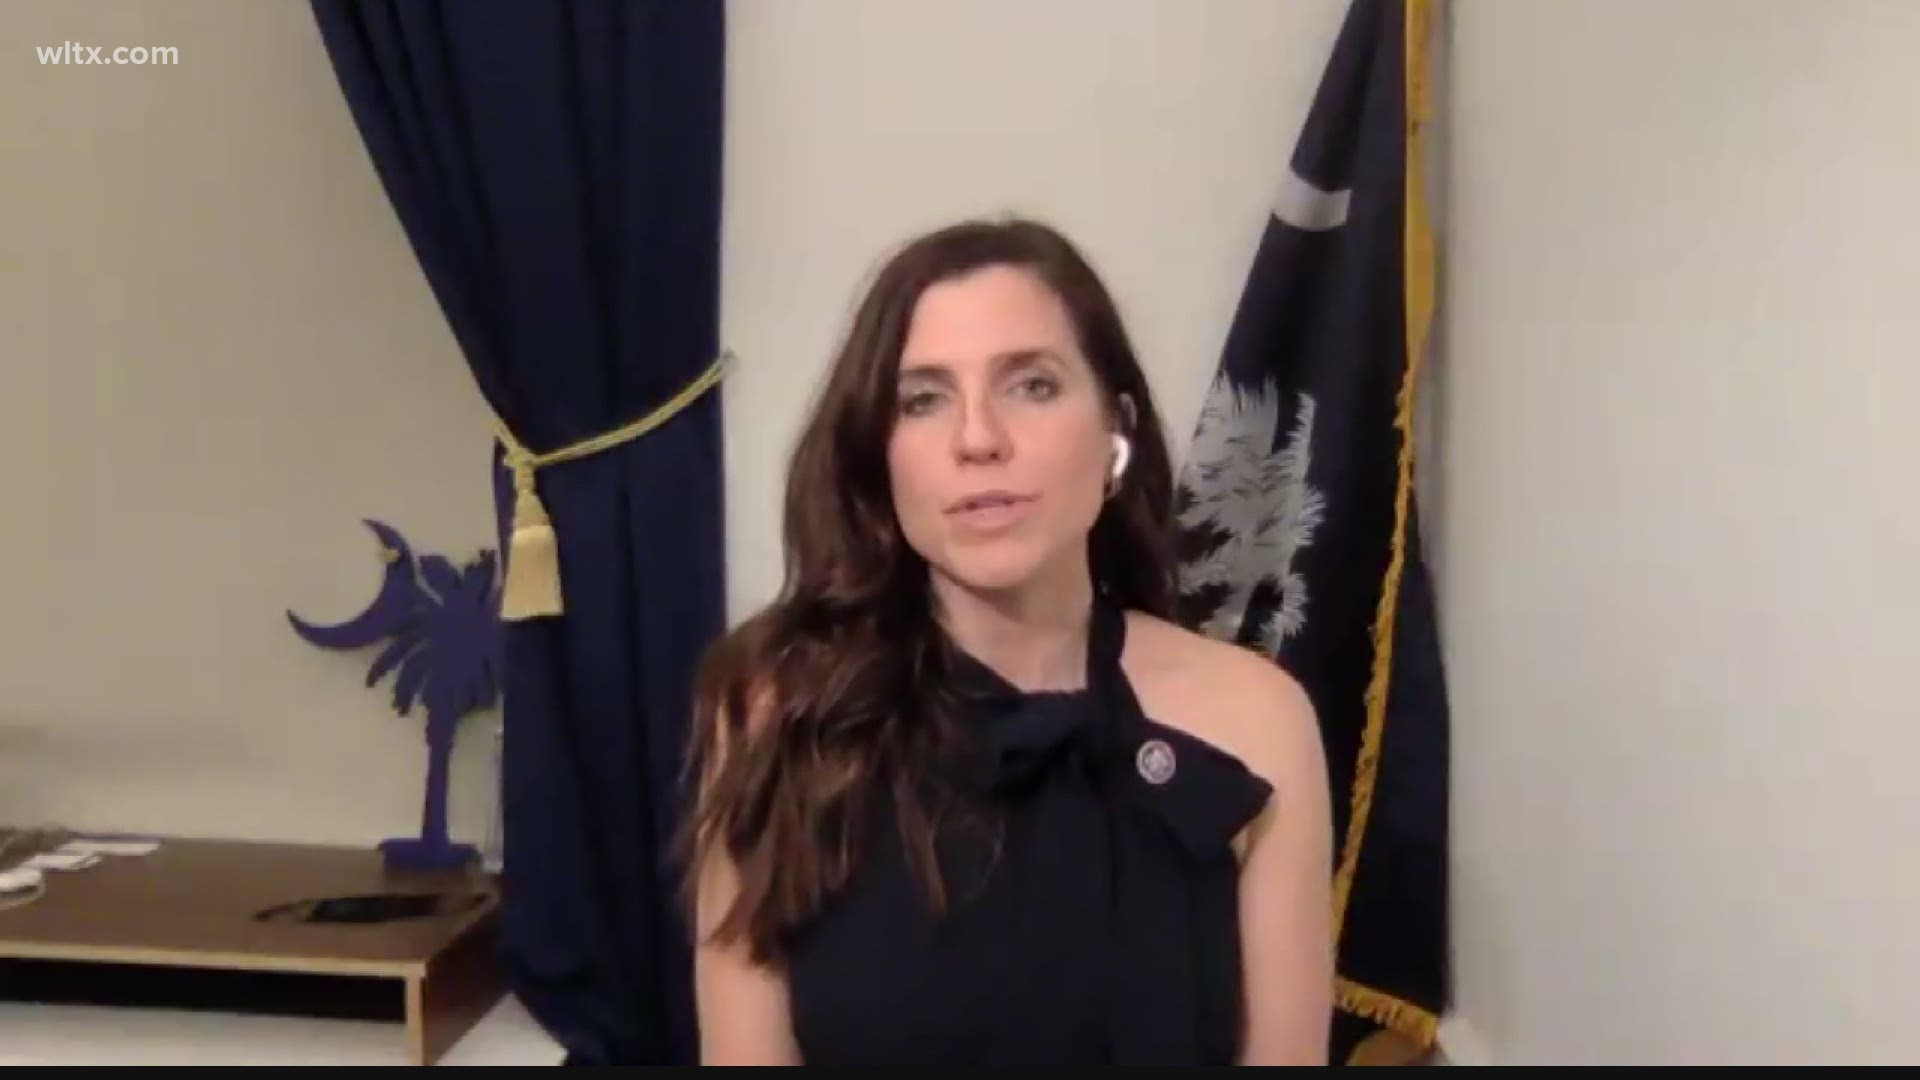 Freshman Rep. Nancy Mace says President Trump should have conceded weeks ago, and called Tuesday's violence in the nation's capital 'un-American' and 'anarchy.'